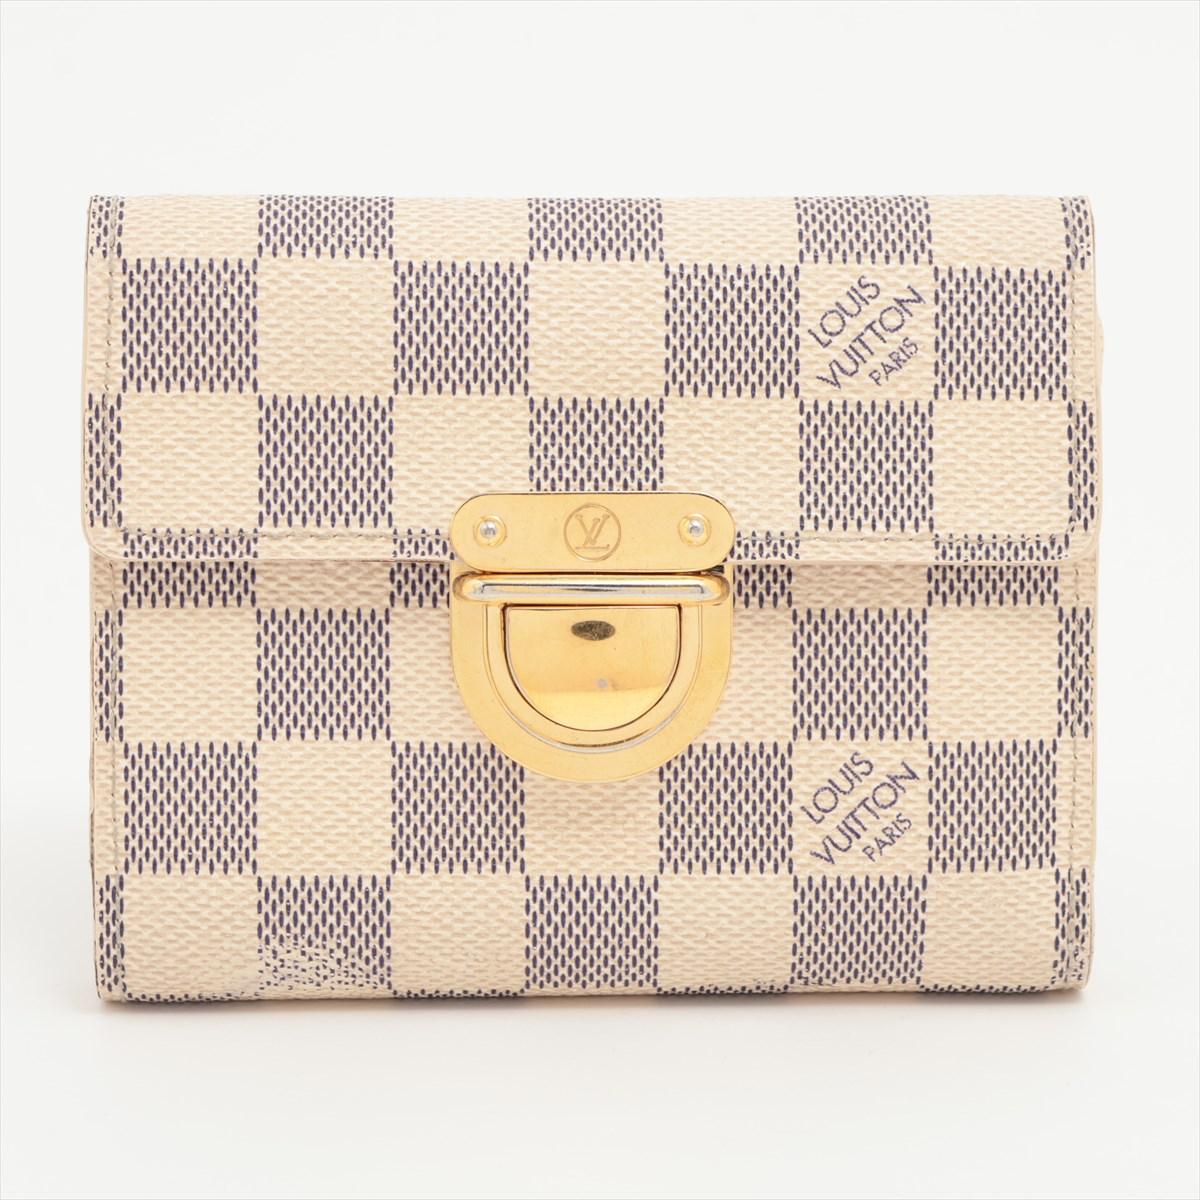 The Louis Vuitton Damier Azur Portefeuille Koala Wallet is an exquisite and versatile accessory that seamlessly combines style and practicality. Adorned with the iconic Damier Azur canvas, the wallet exudes a timeless and fresh aesthetic. The Koala